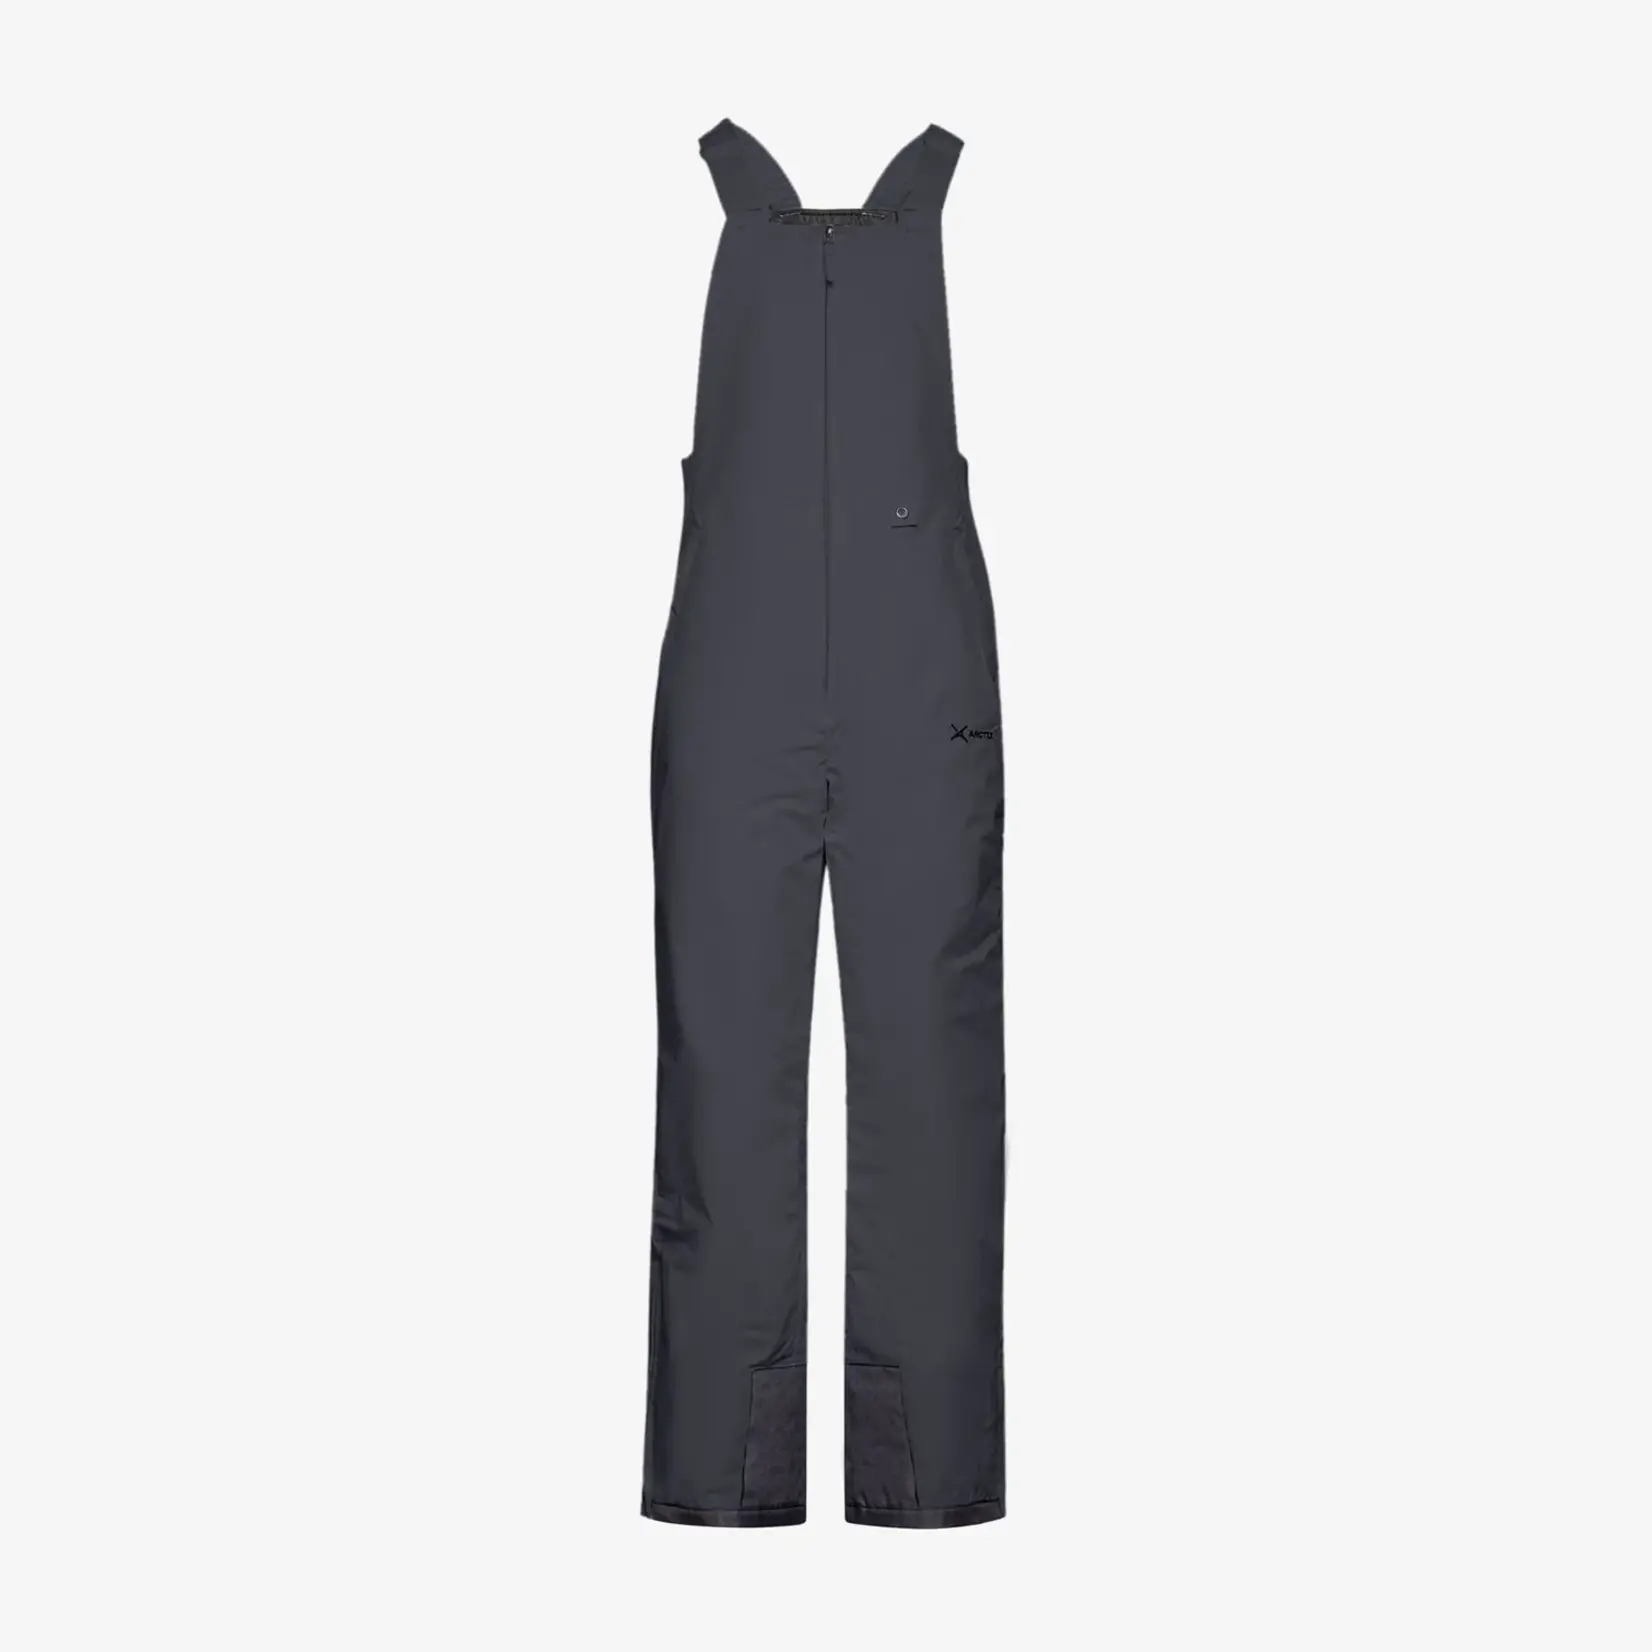 Men's Insulated Pants, Overalls & Coveralls